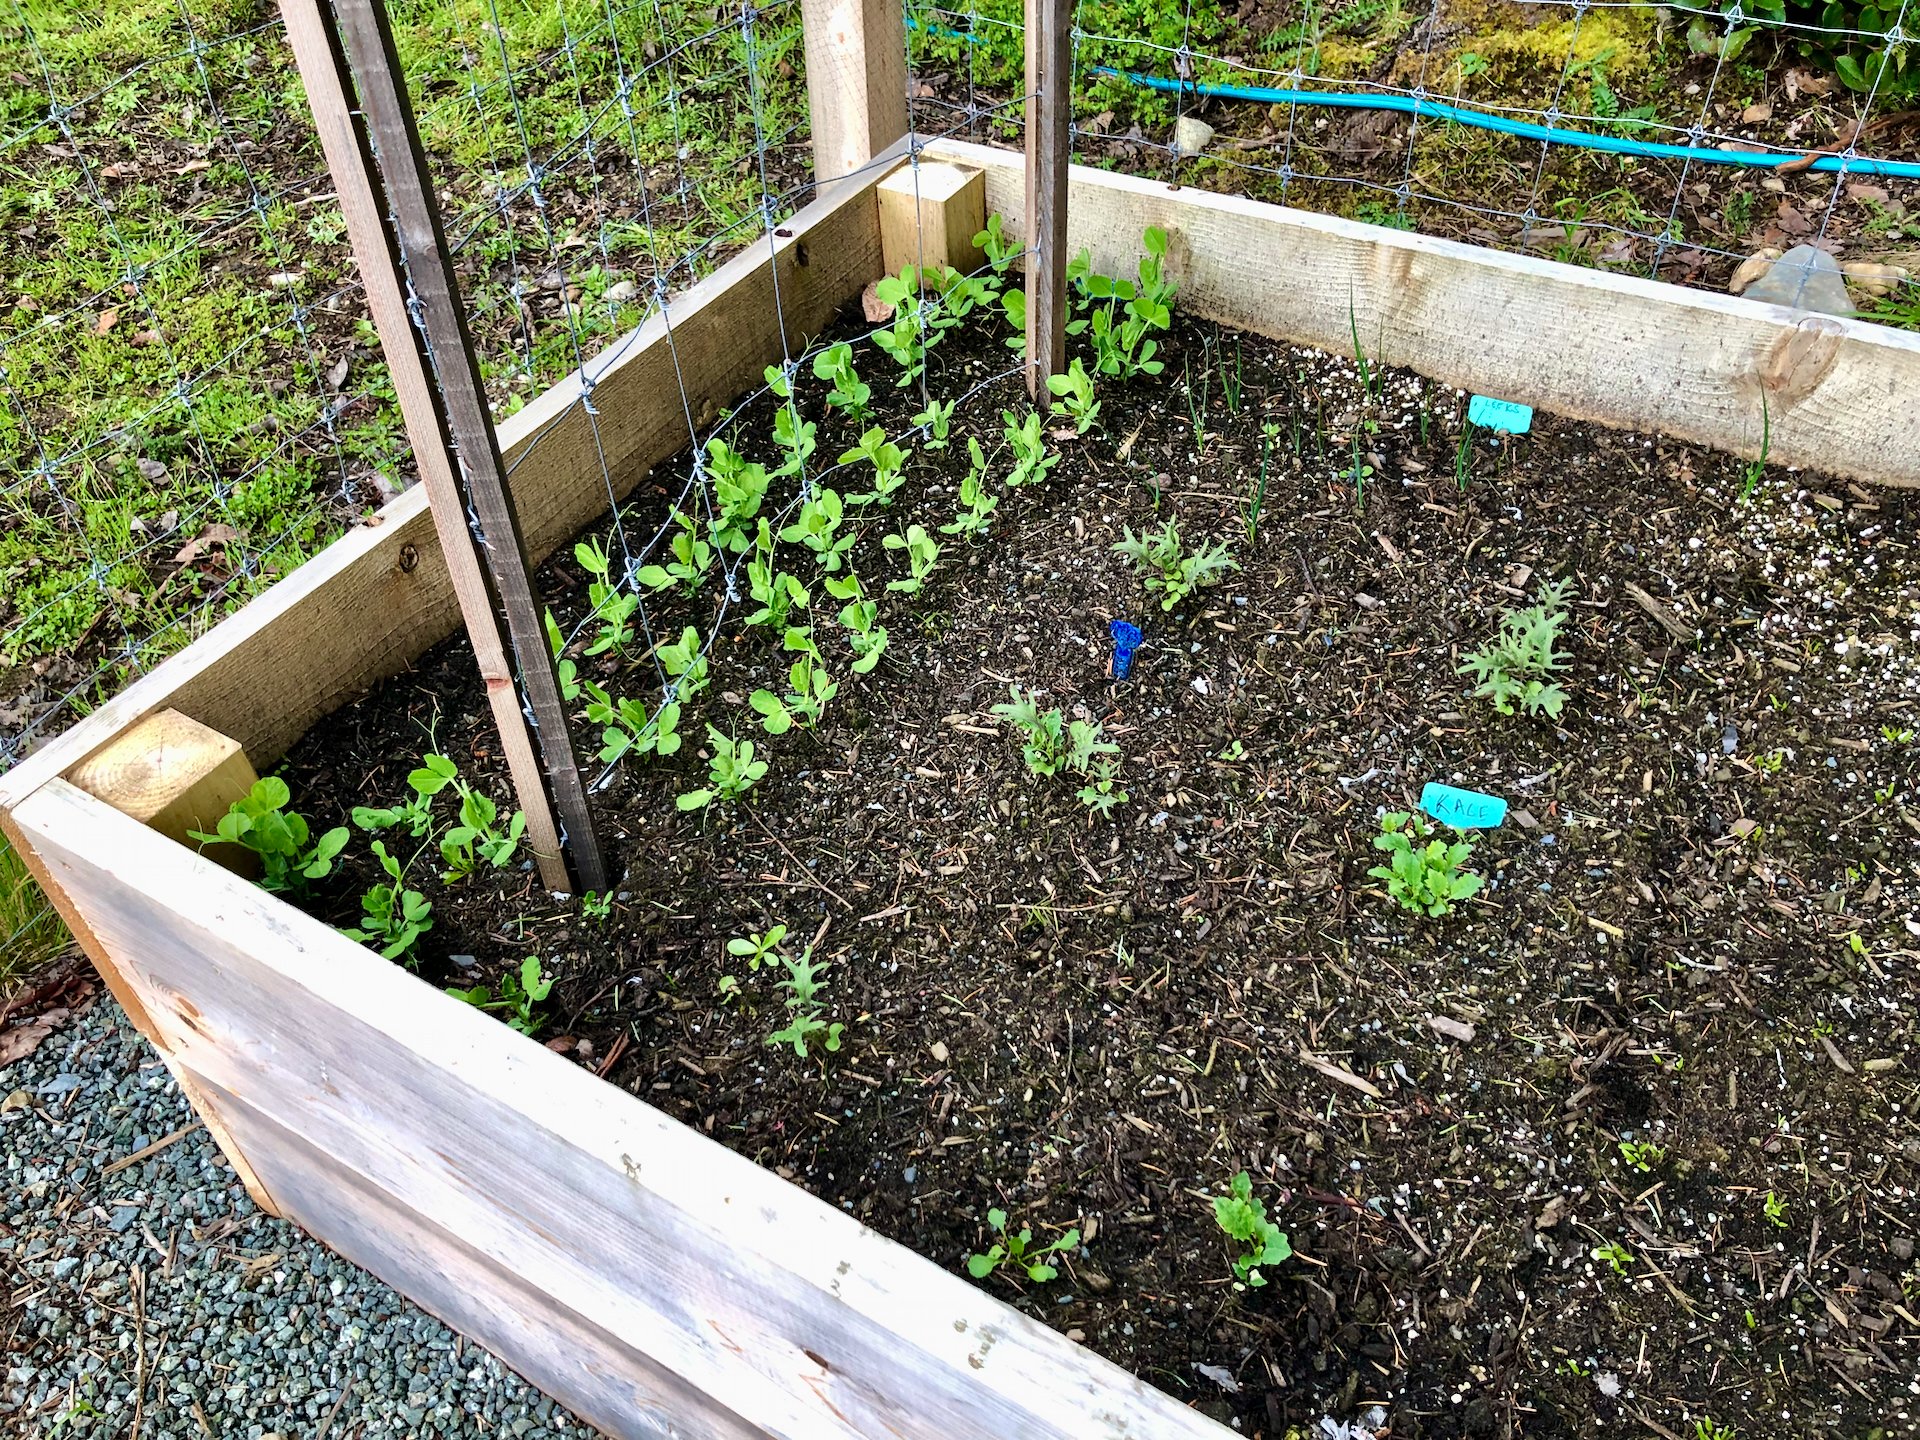  The peas are growing well. I added the trellises in so they can start climbing immediately. The kale is starting to sprout. 